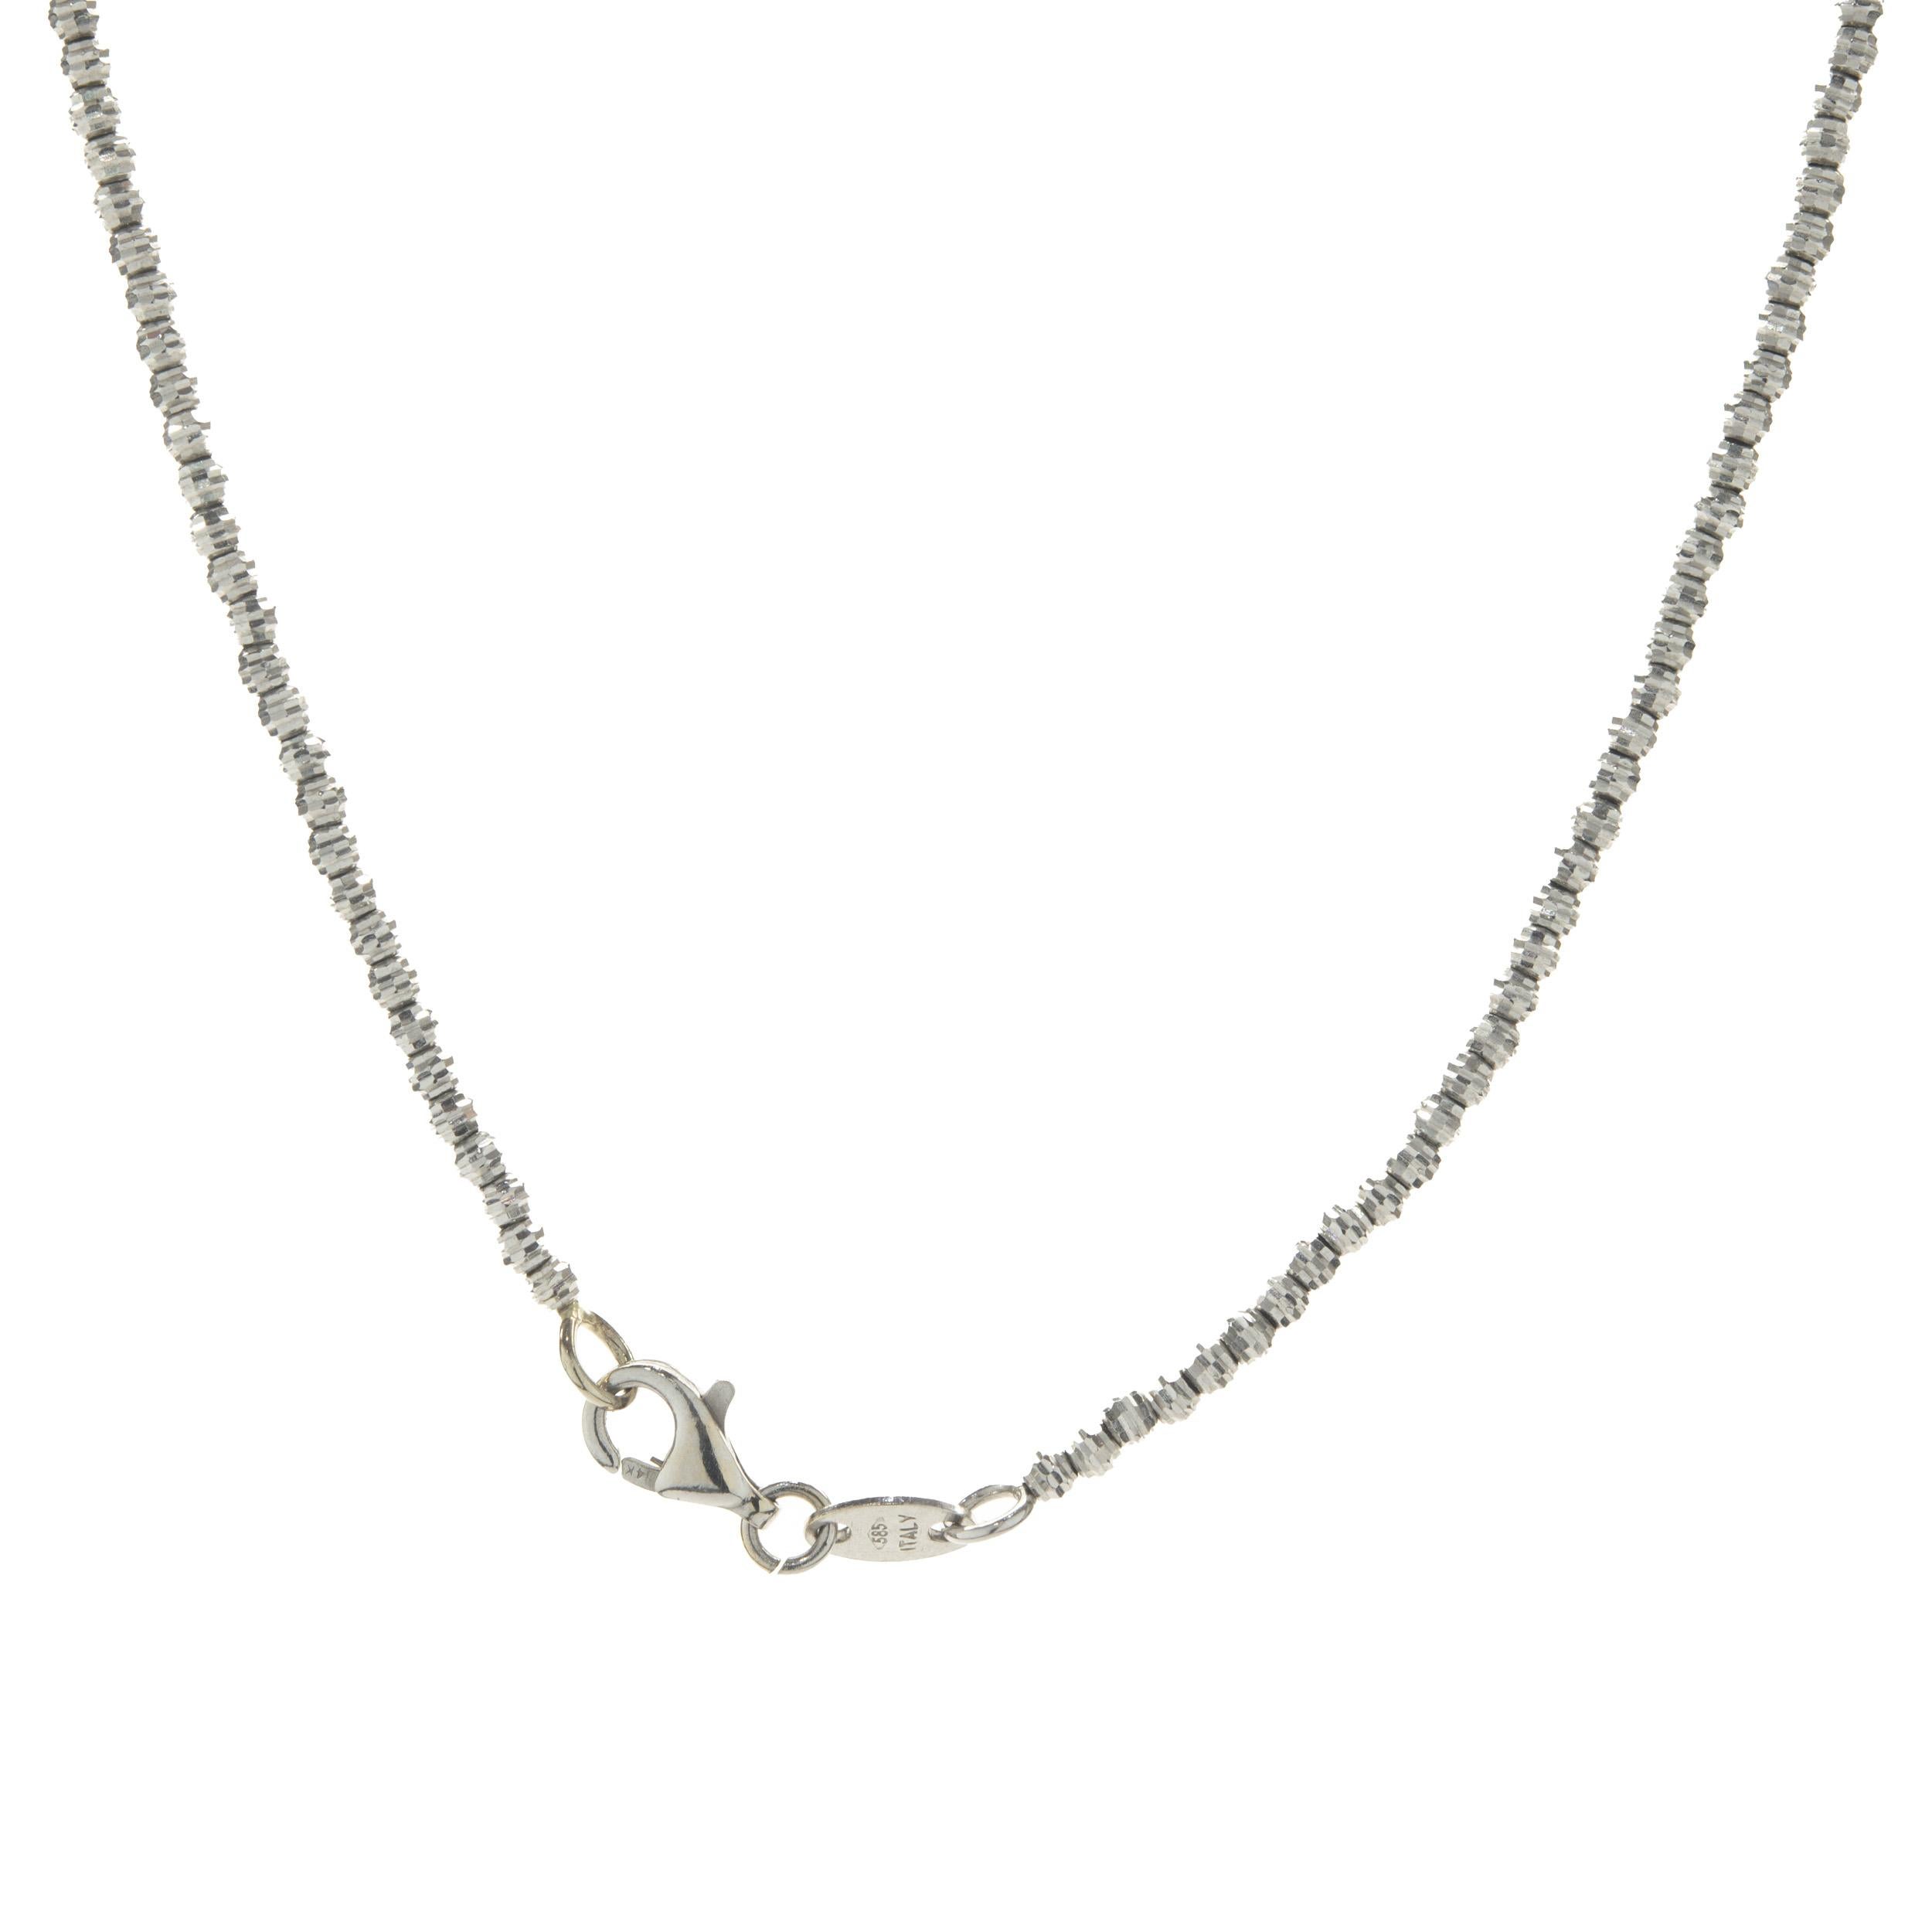 Material: 14K white gold
Dimensions: necklace measures 14-inches in length
Weight: 5.38 grams
